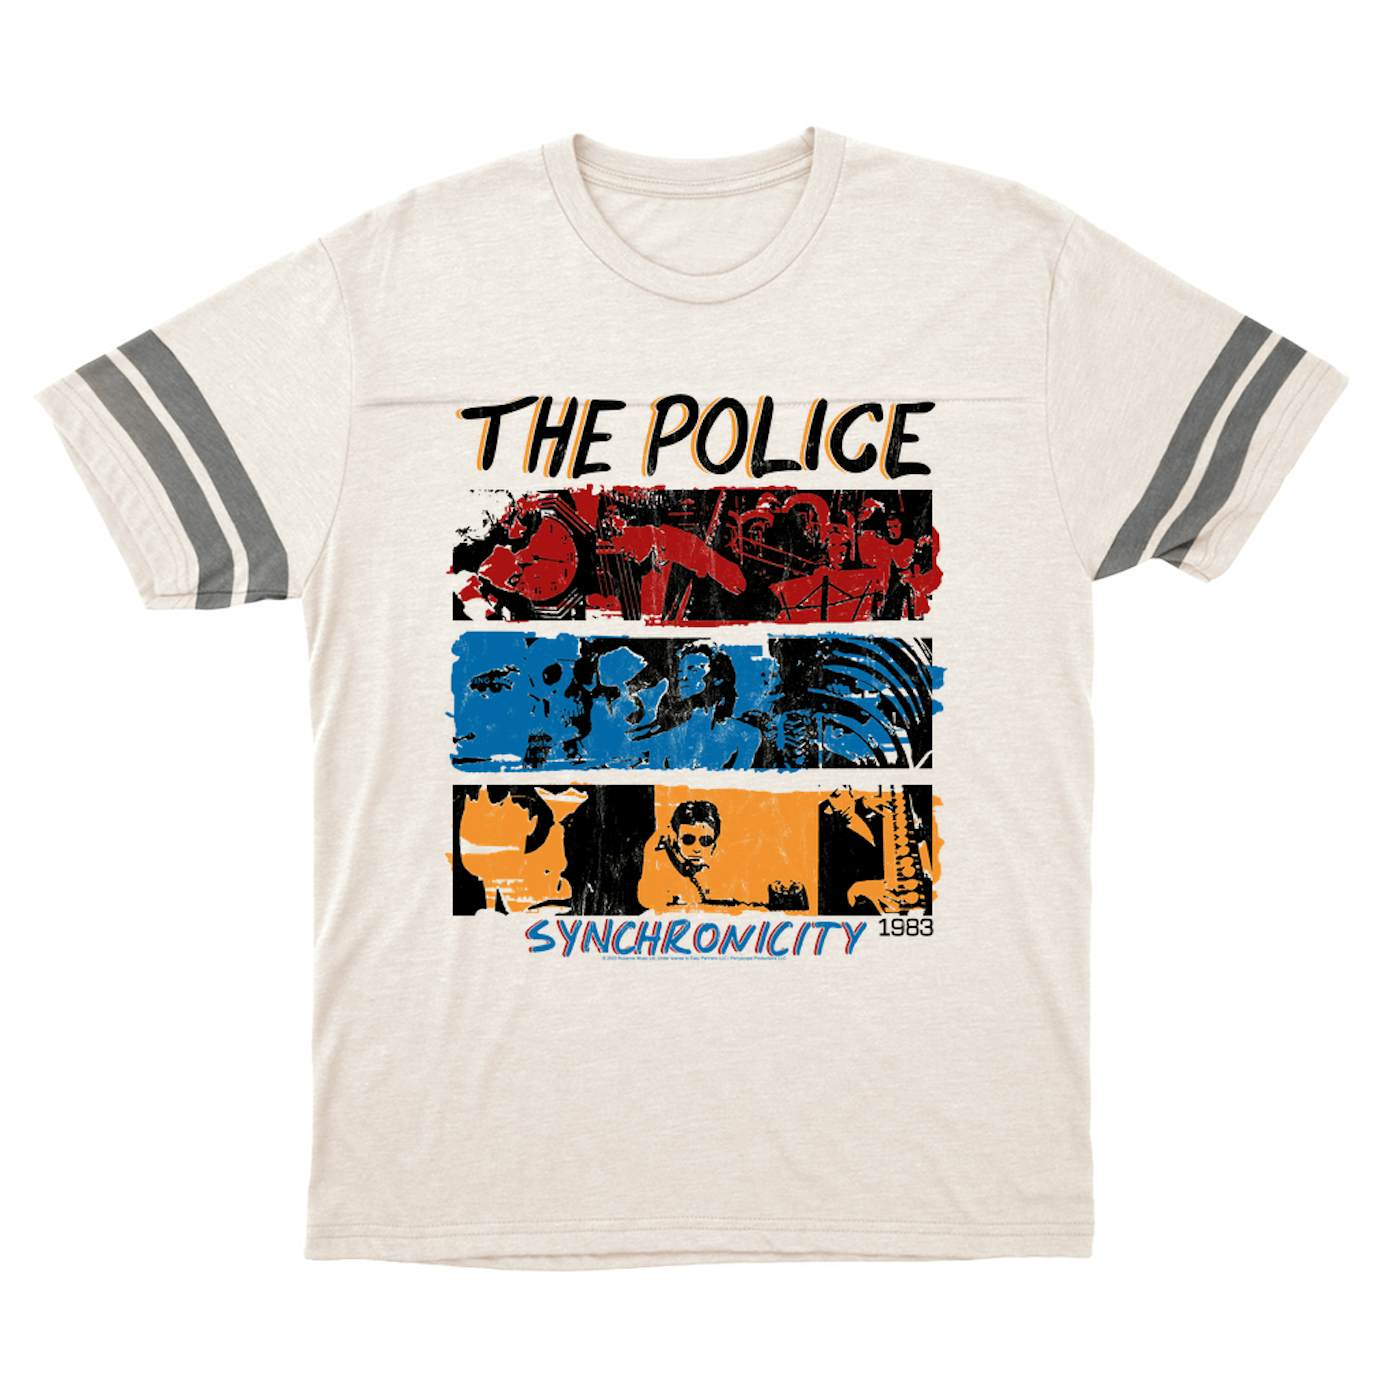 The Police T-Shirt | 1983 Synchronicity Tour Distressed (Merchbar Exclusive) The Police Football Shirt